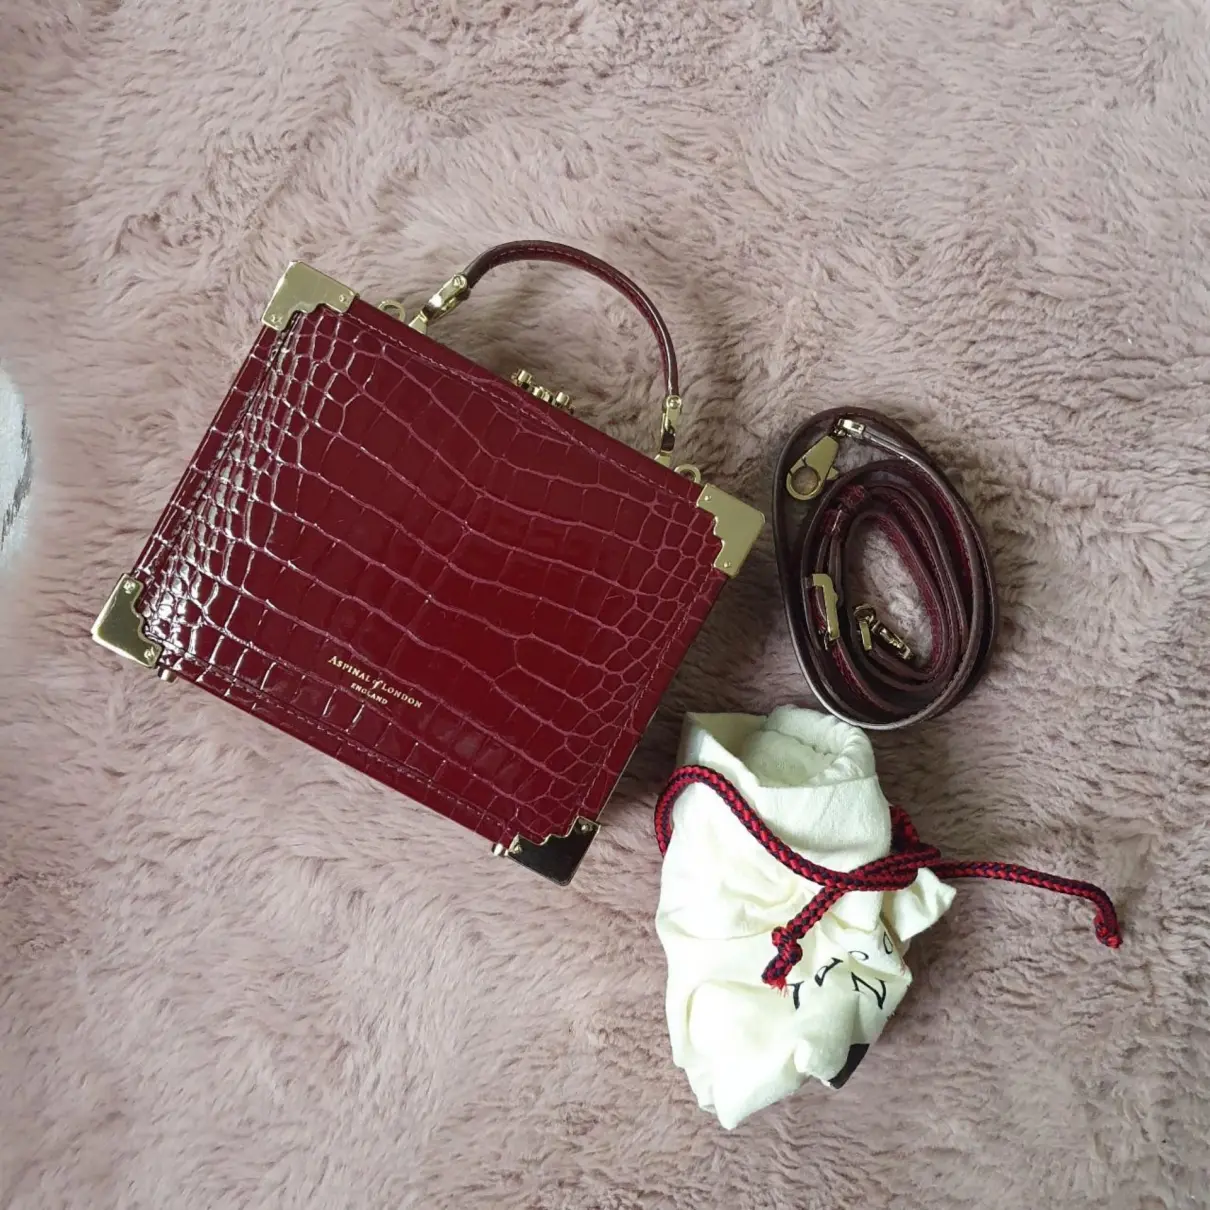 Buy Aspinal Of London Patent leather crossbody bag online